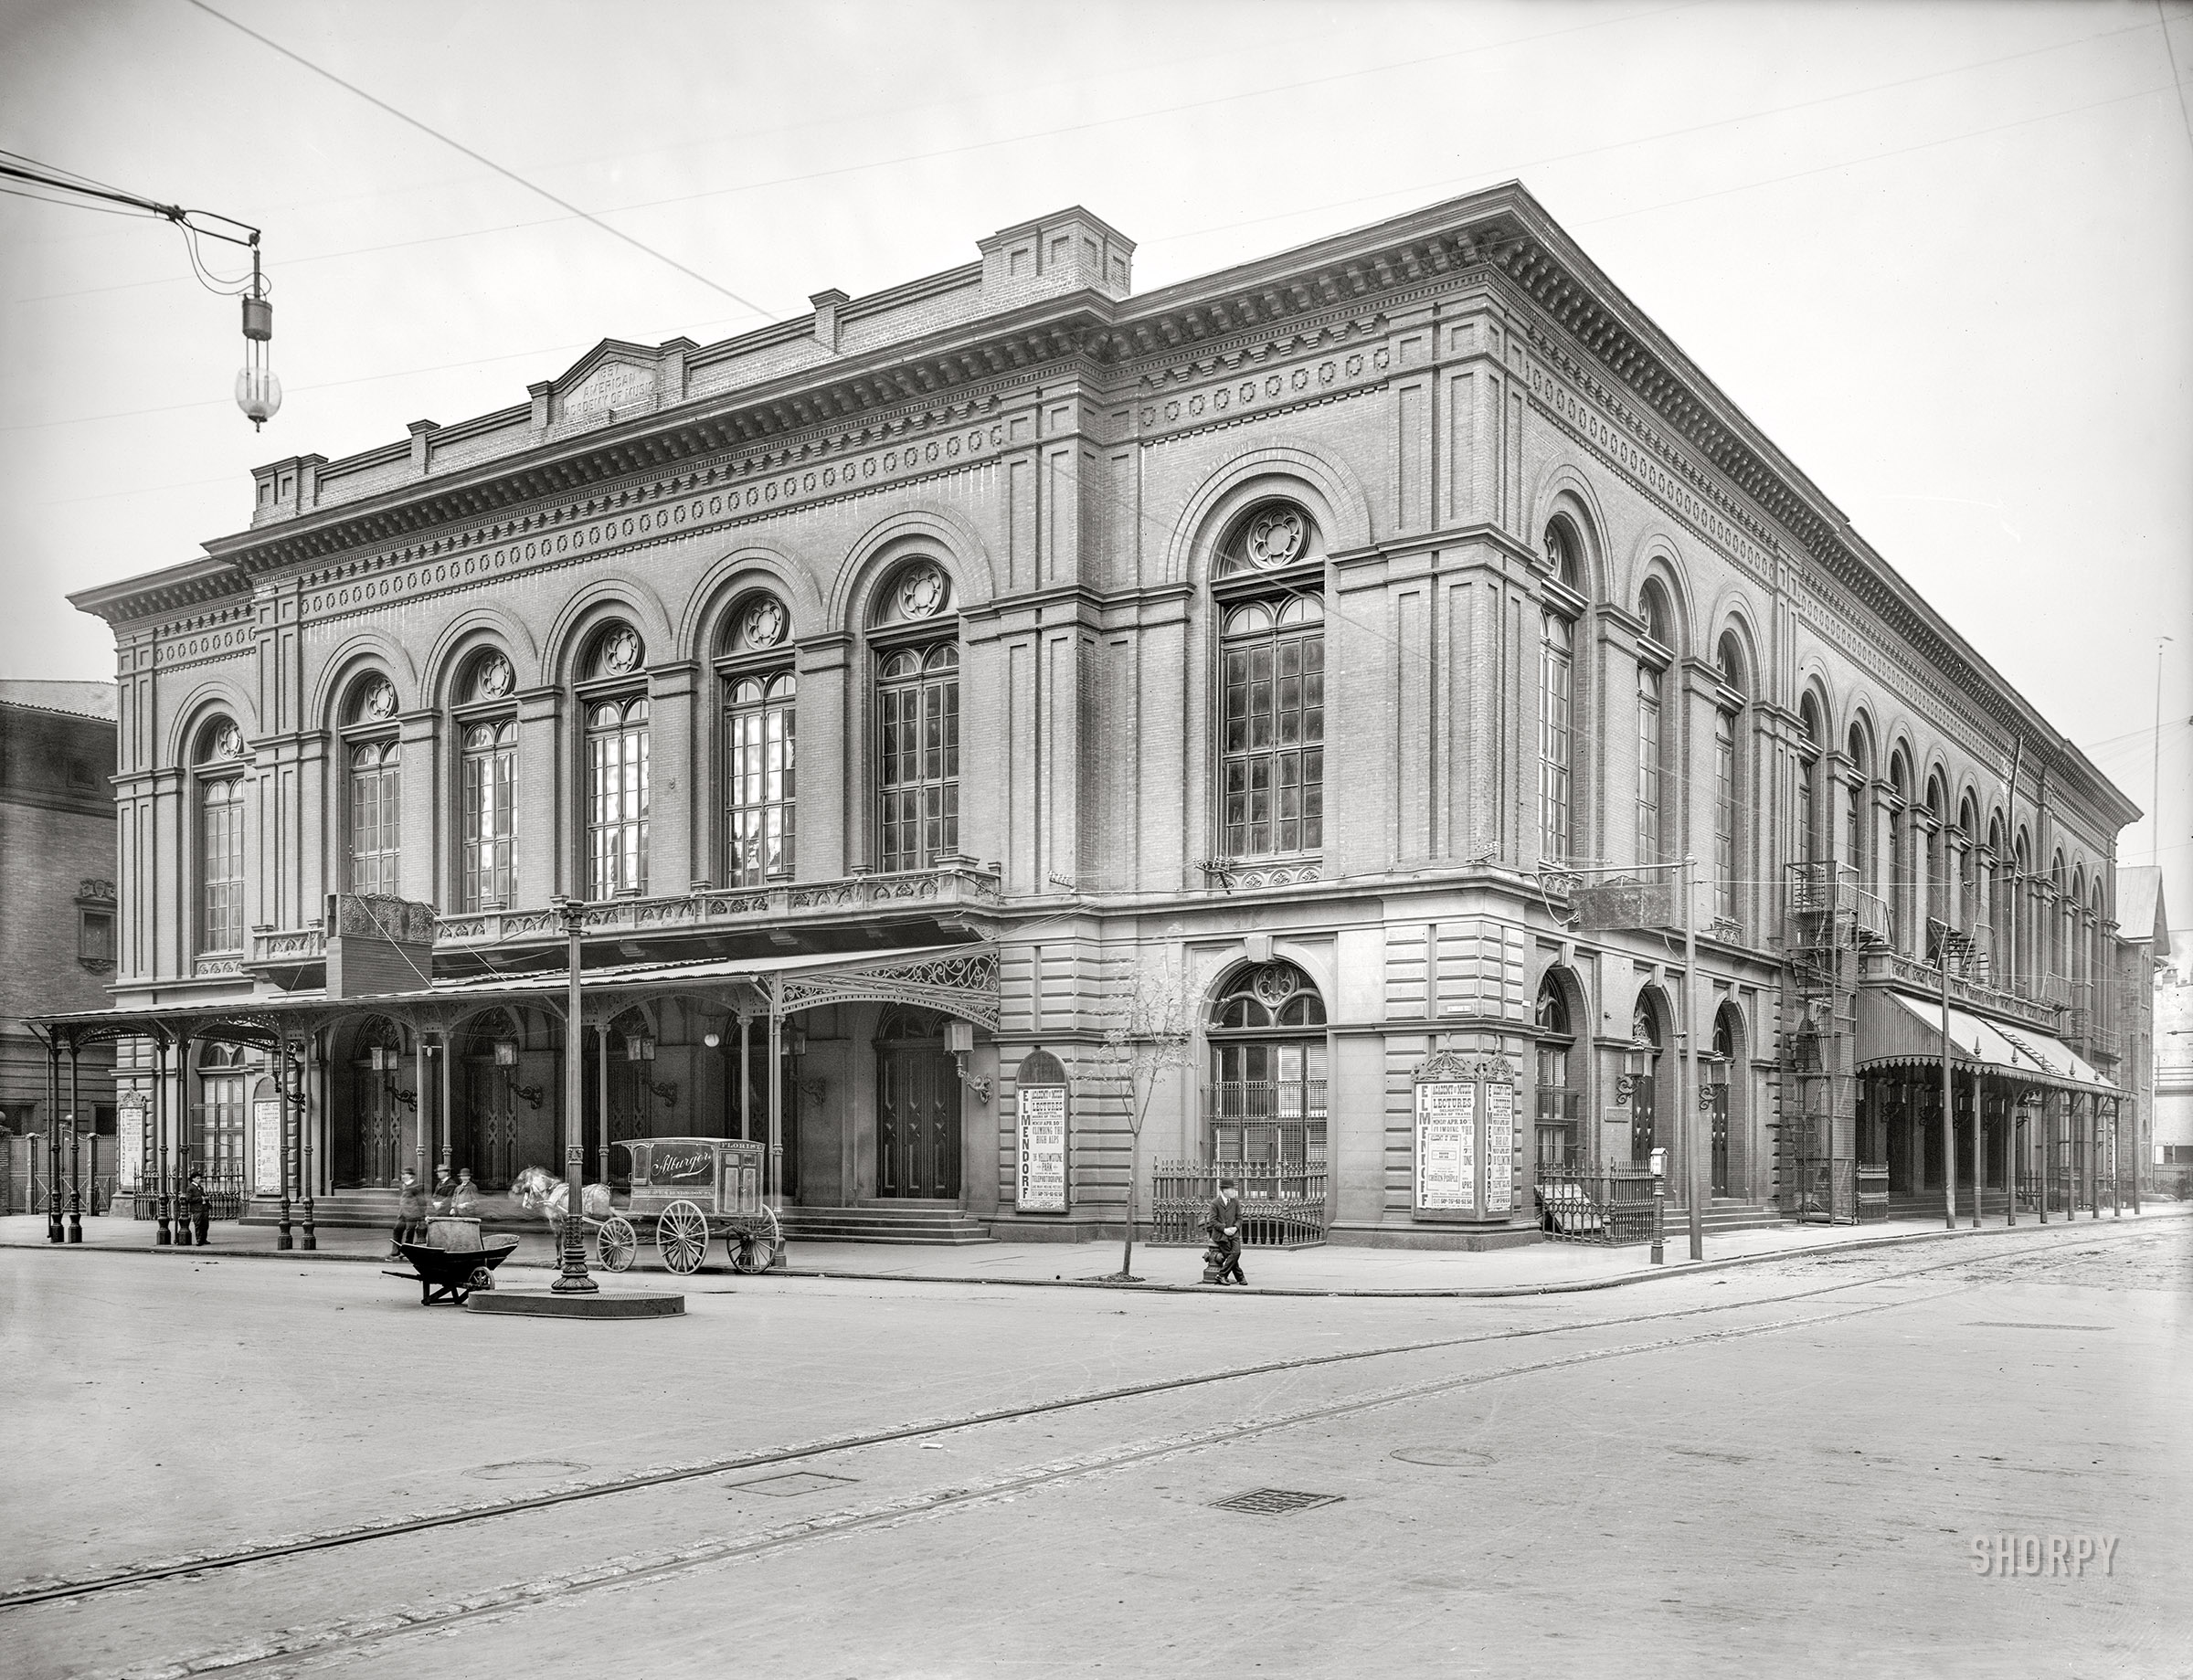 Philadelphia, 1905. "American Academy of Music." With two examples of that latest thing in signage, the electric carriage call. 8x10 glass negative, Detroit Publishing Co. View full size.